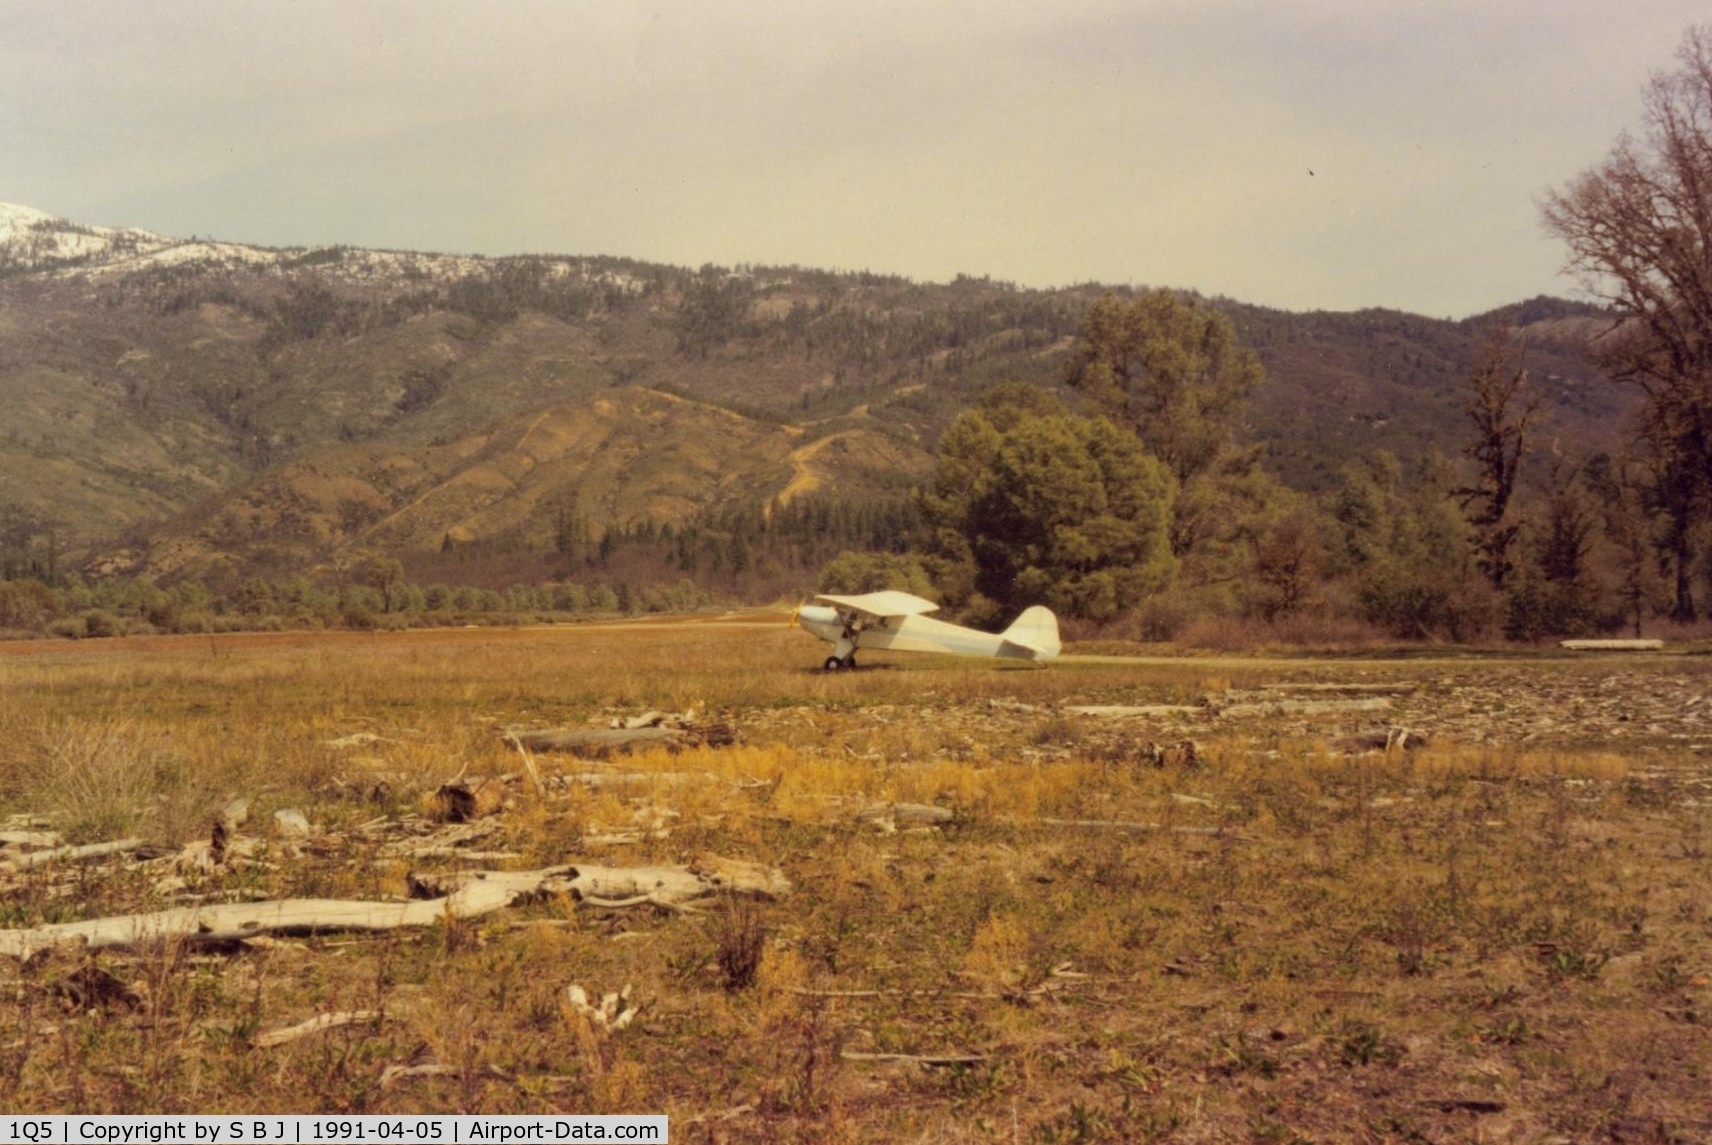 Gravelly Valley Airport (1Q5) - N39932 at Lake Pillsbury in 1991. View is to the north and down the runway. Most pilots take off in the opposite direction toward the lake to avoid the higher terrain. Notice driftwood near 932 which is from high water.